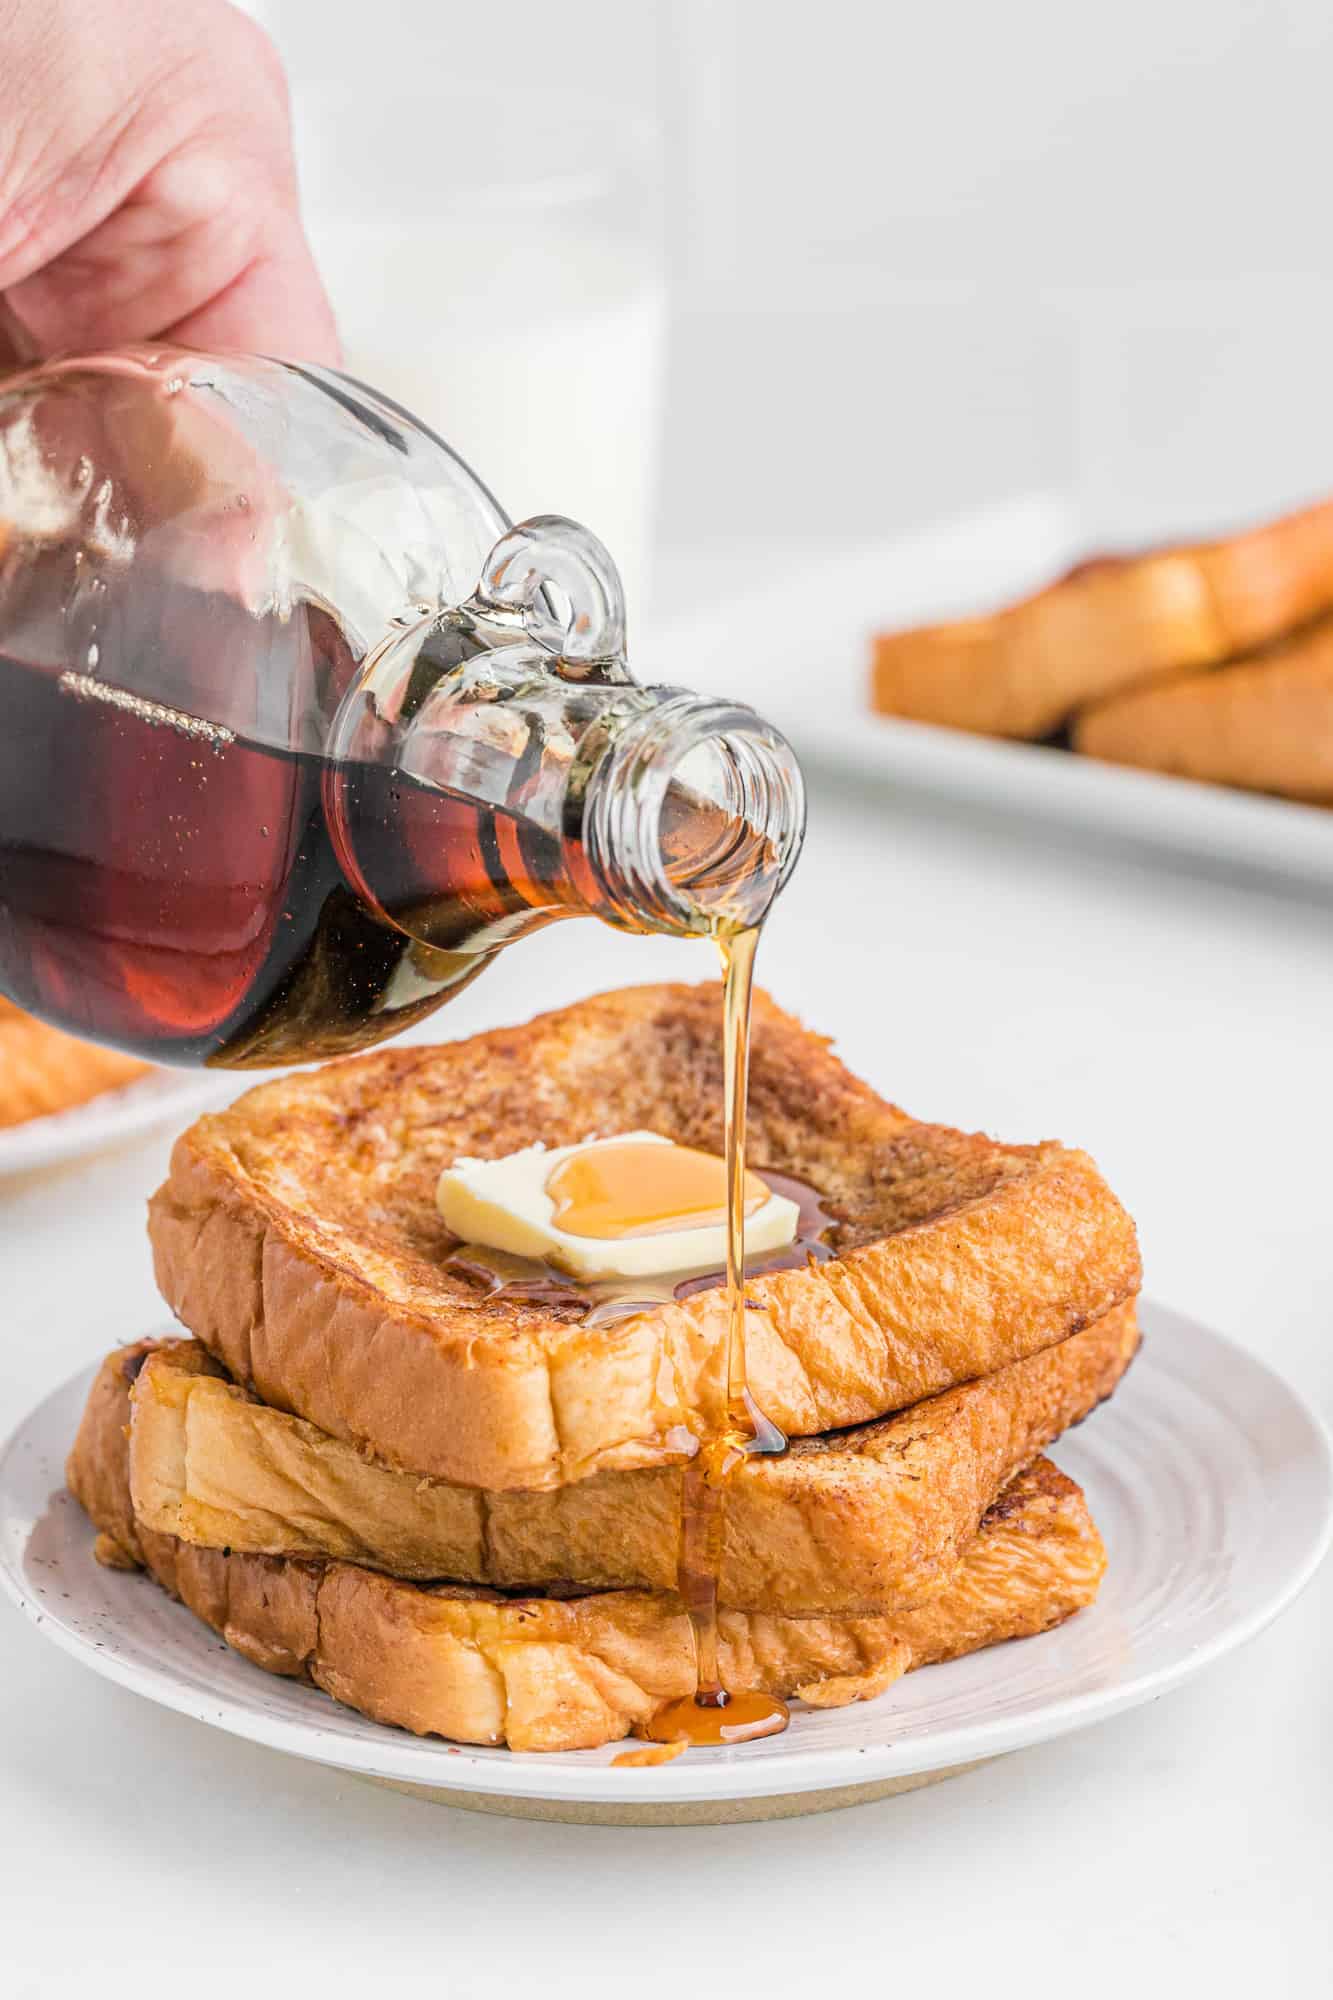 Maple syrup is drizzled over top of a stack of French toast topped with butter on a plate.